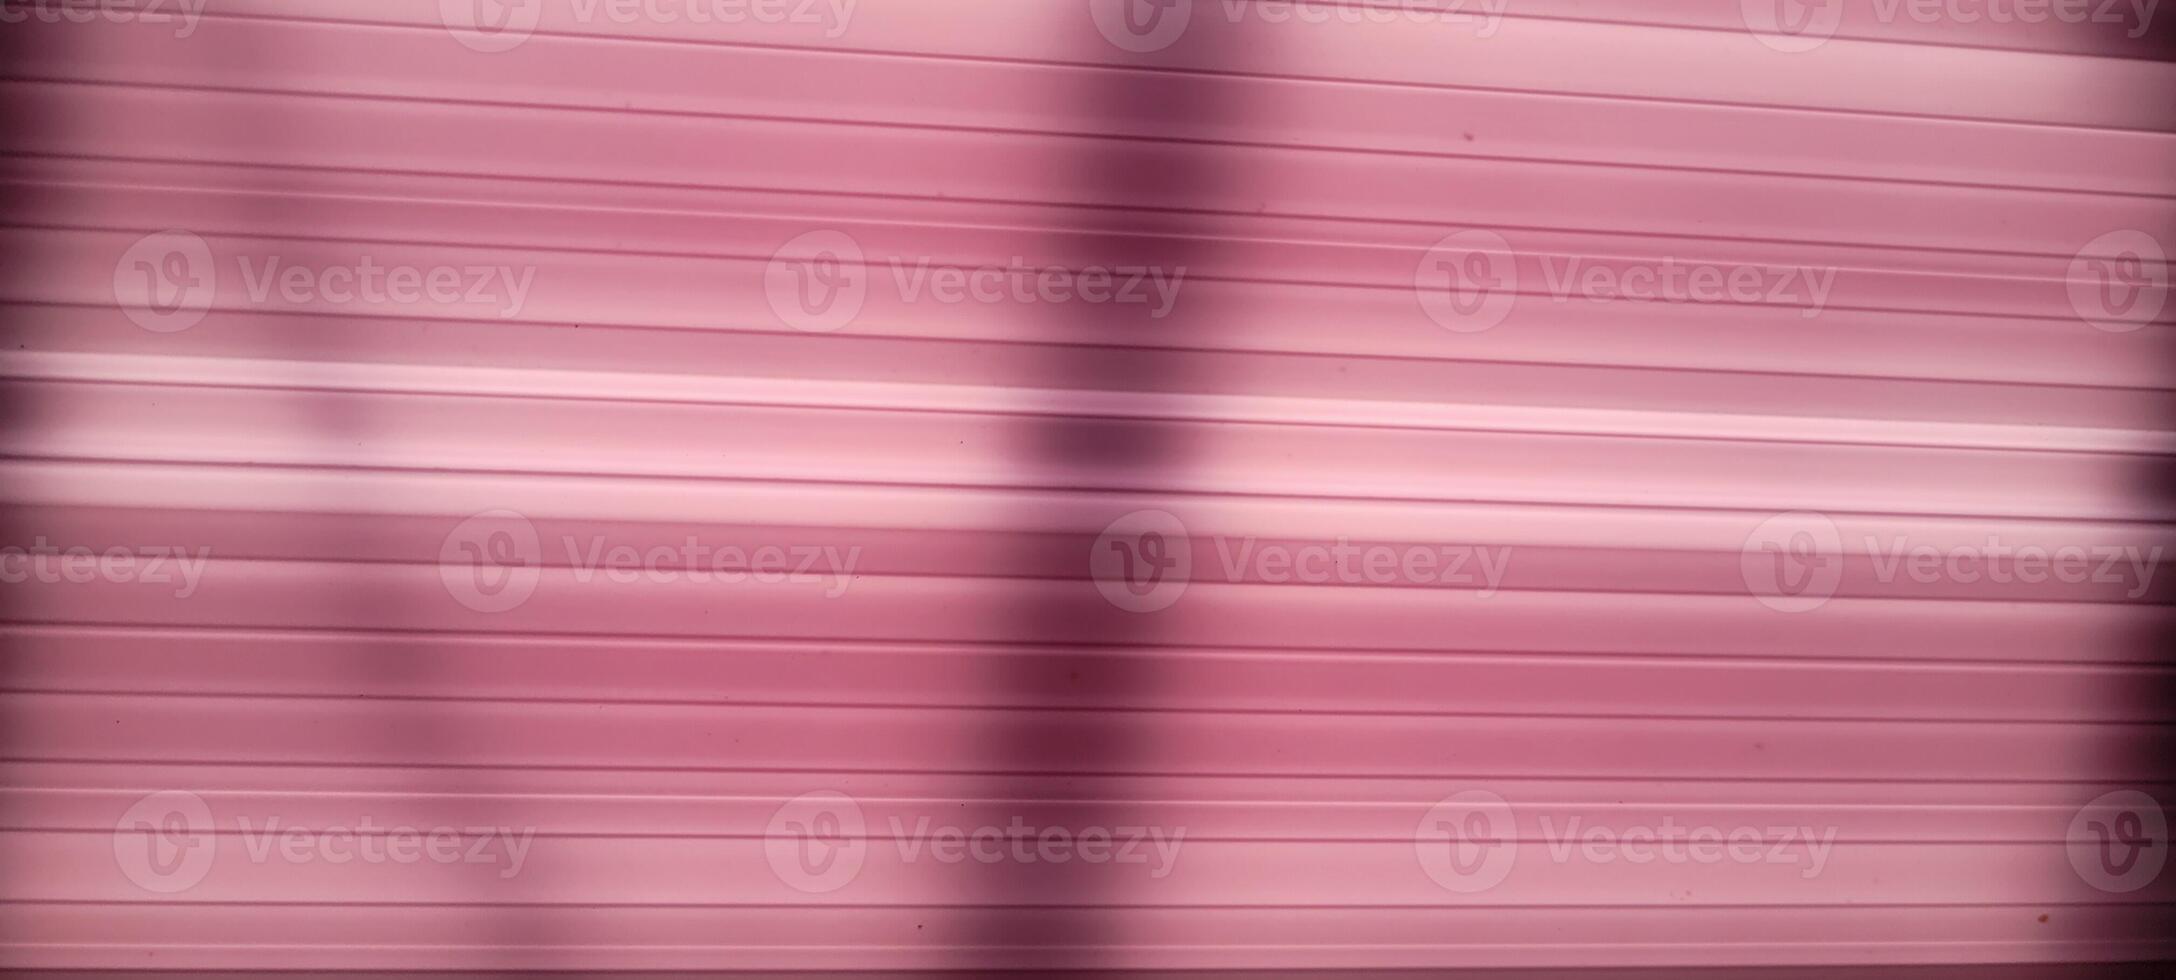 pink background with rustic texture photo